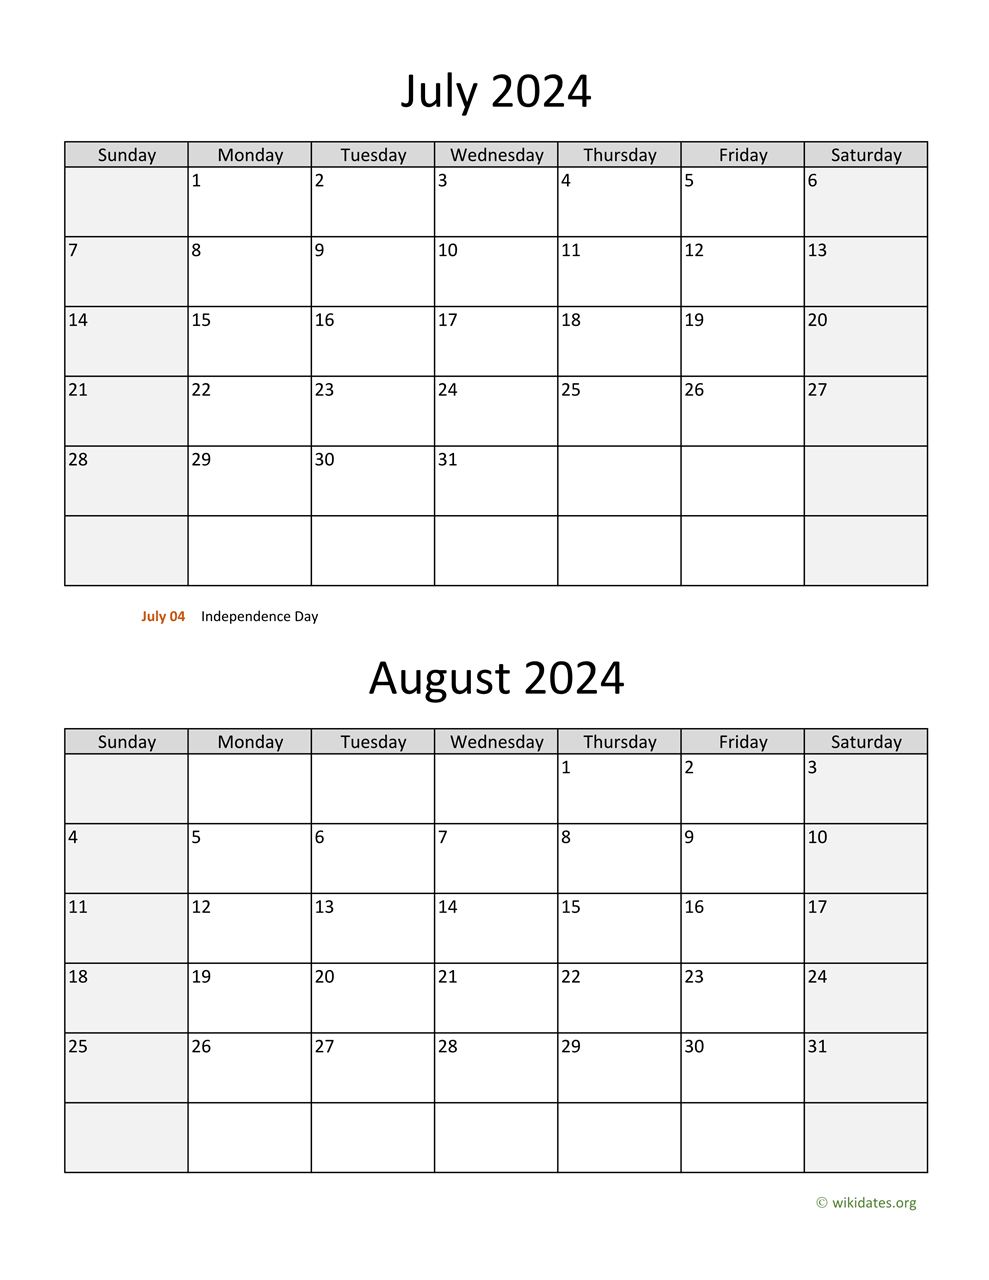 July And August 2024 Calendar | Wikidates for Printable July August 2024 Calendar